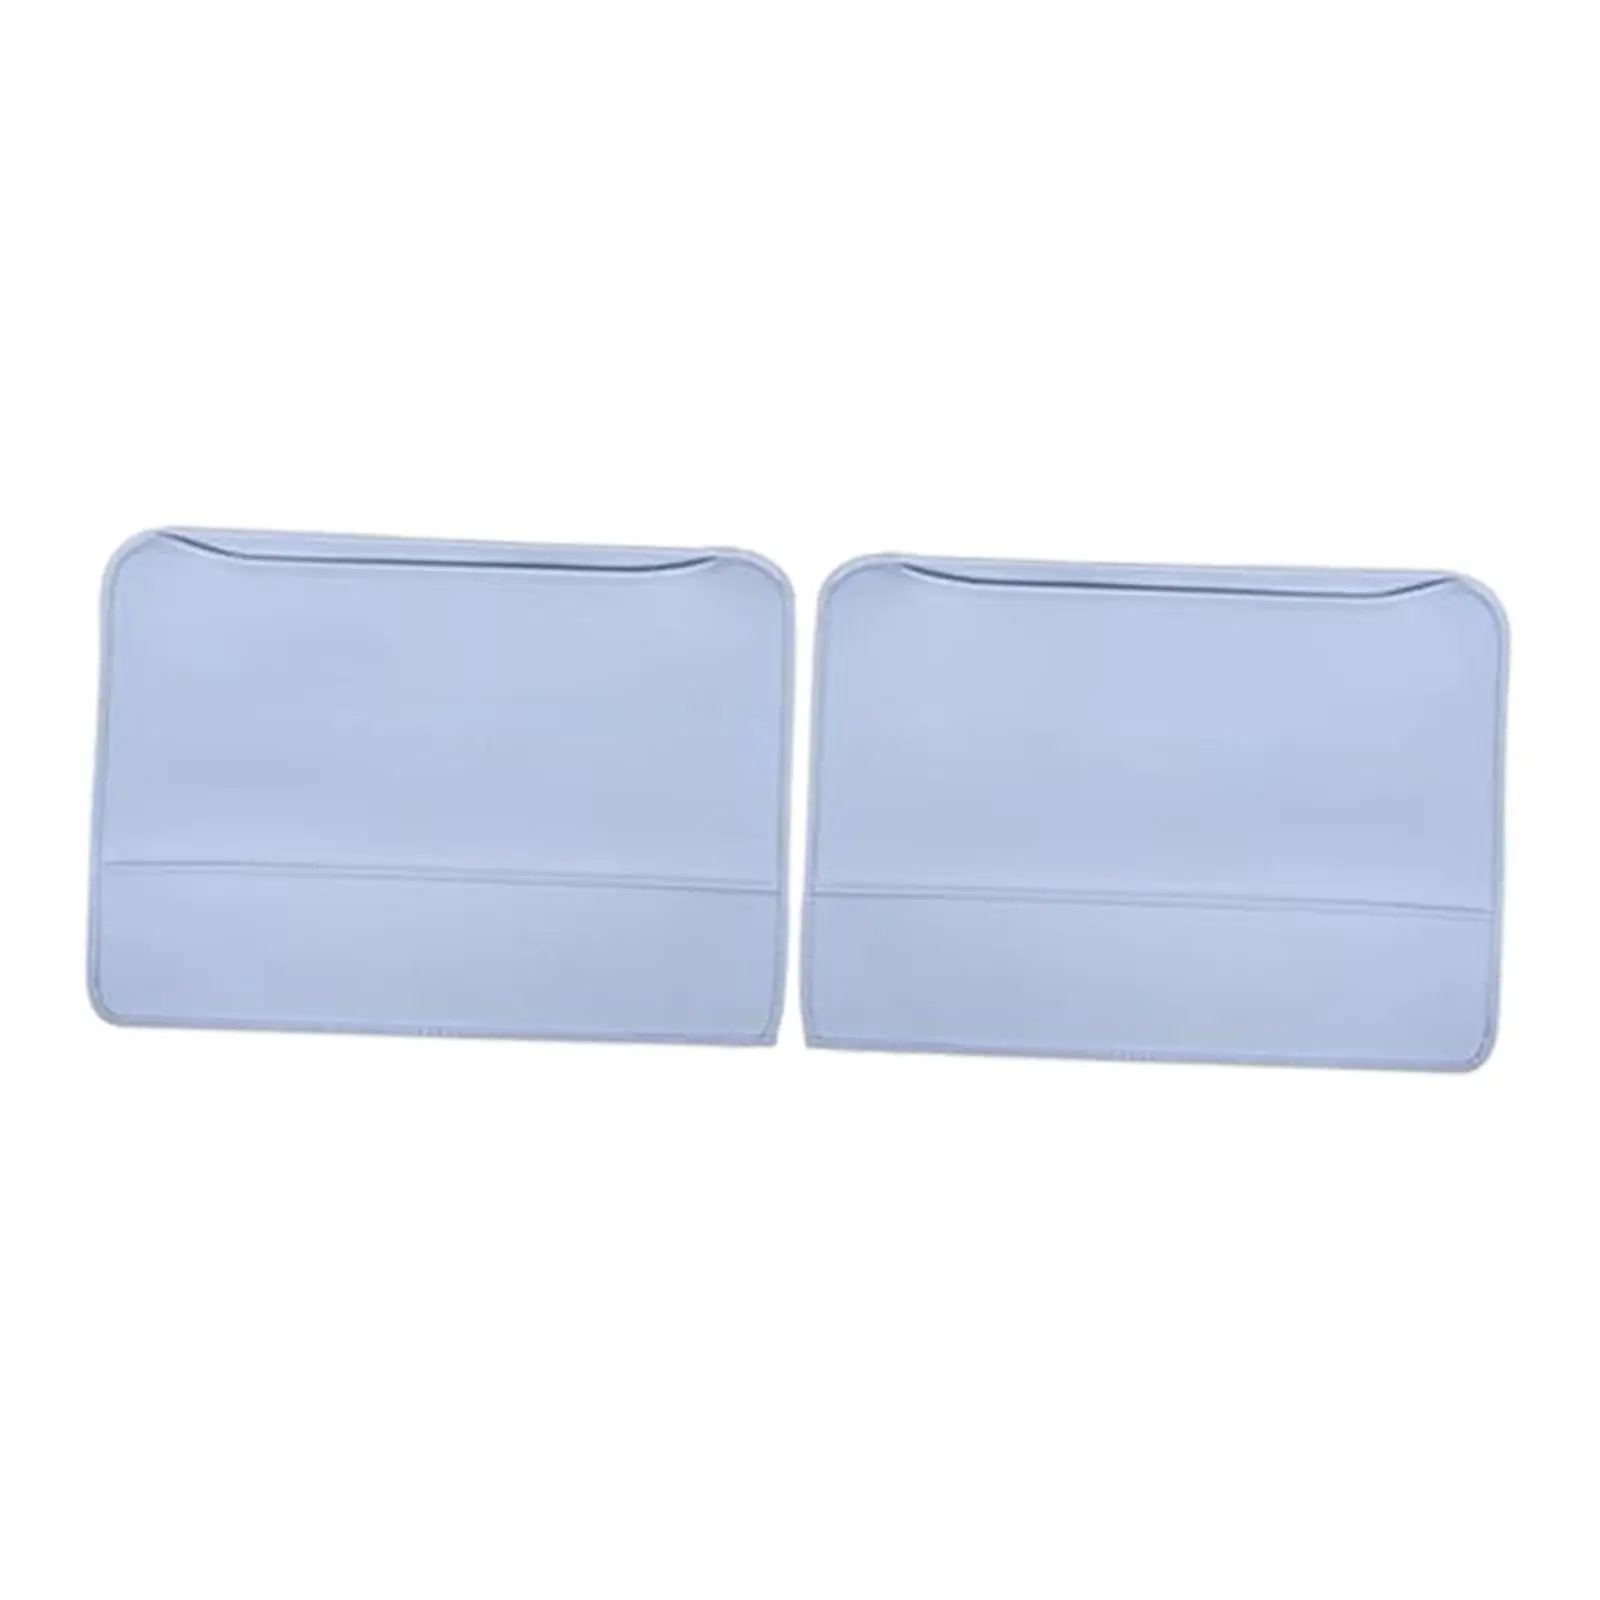 2x Seat Back Kick Mats Anti Scratches Prevent Dust and Trampling Car Back Seat Pad Cover Backseat Protector for Byd Seal